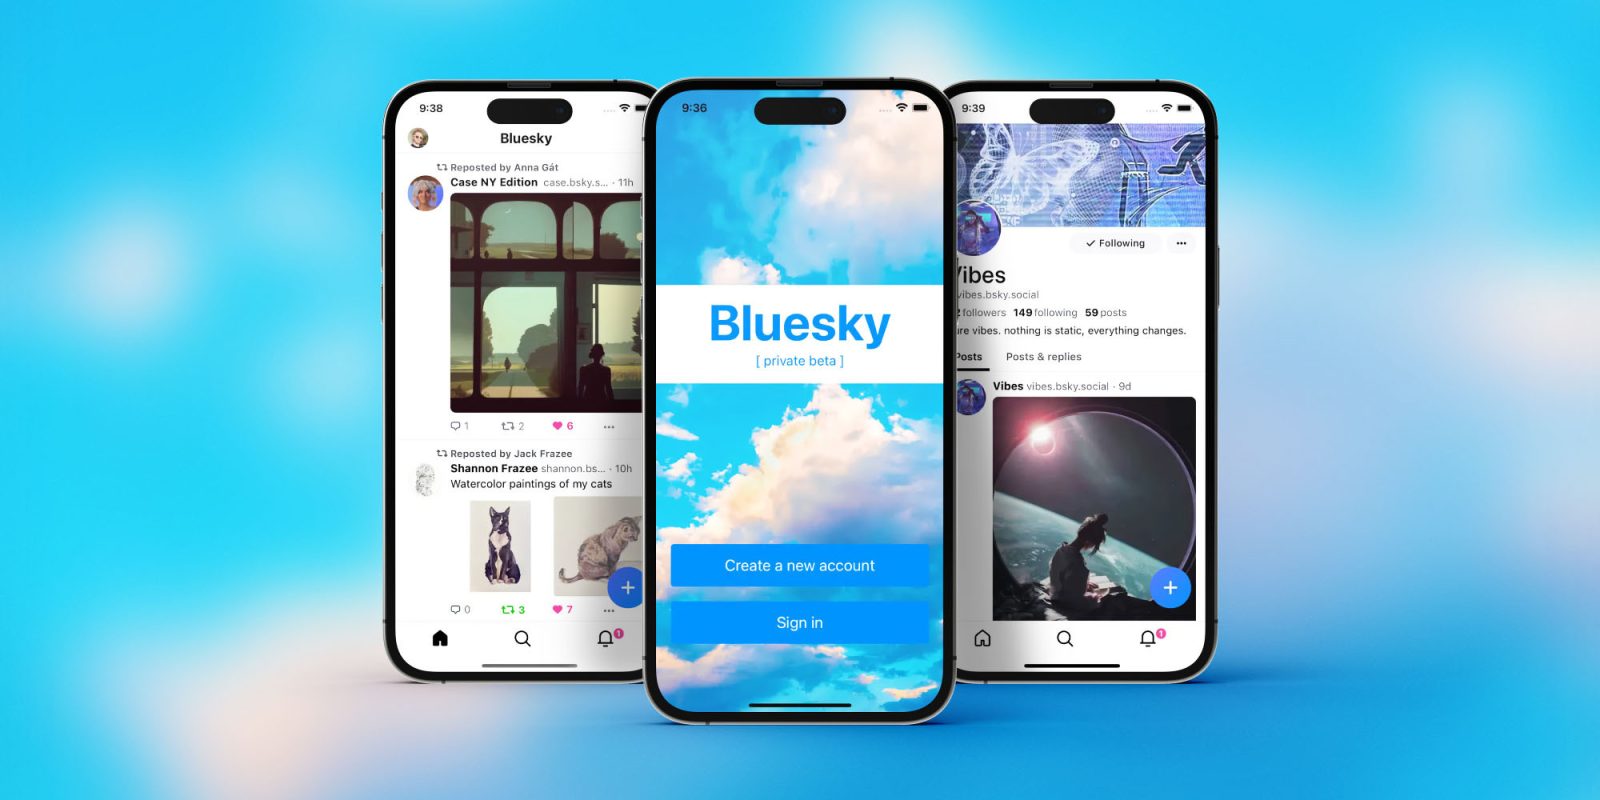 Twitter competitor Bluesky now available on the App Store